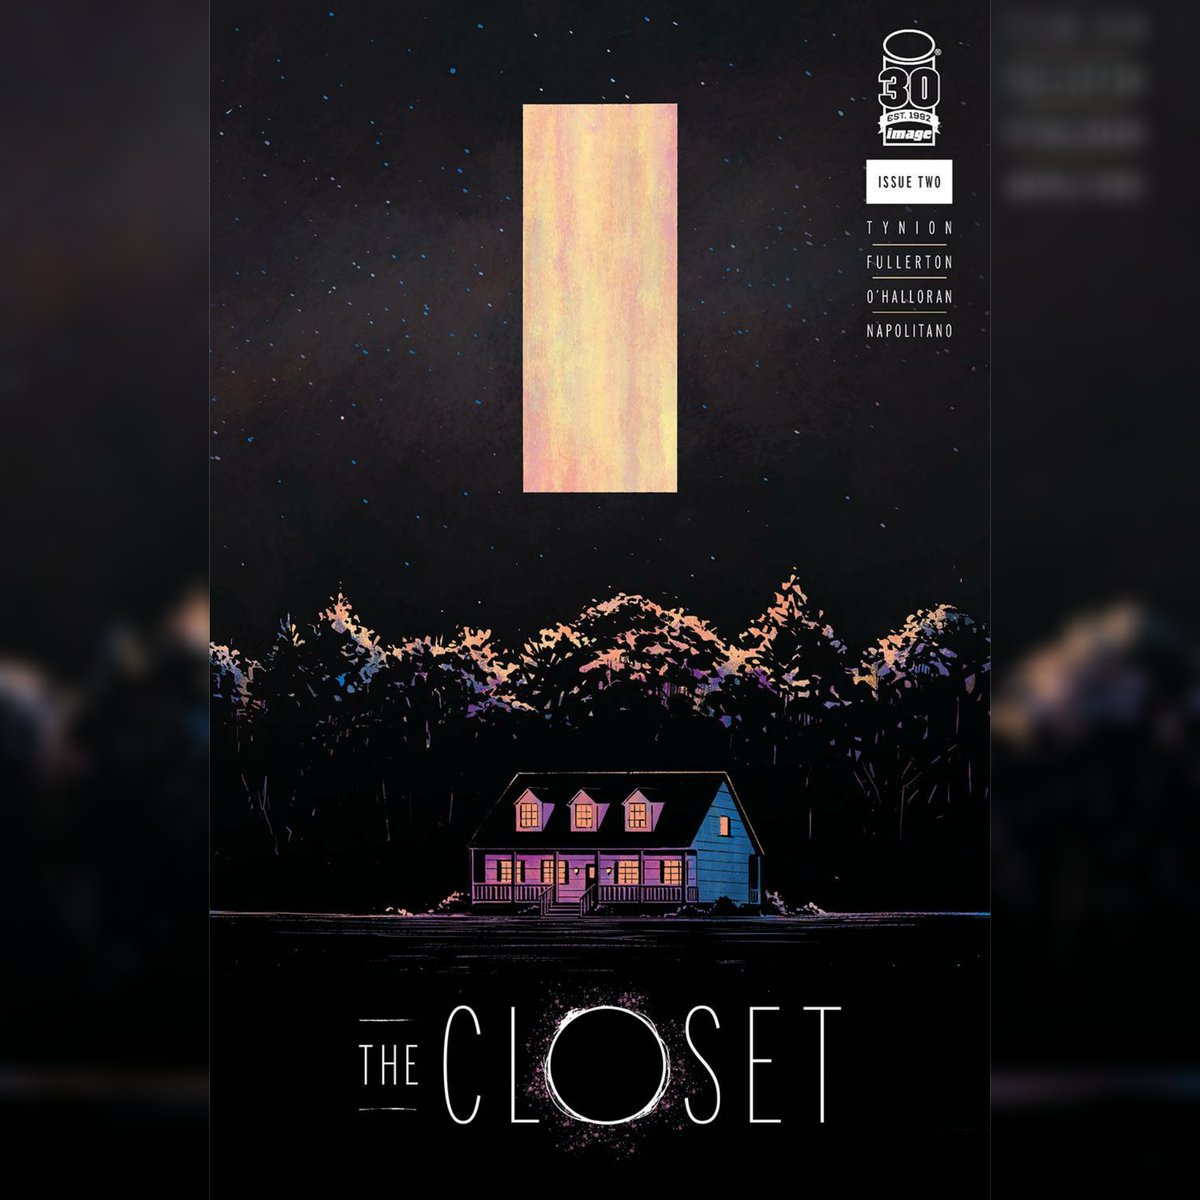 🚪 THE CLOSET # 2 (7/6/2022) - IMAGE COMICS

'...the creature from his nightmares continues to chase him.'

W: James Tynion IV 👉@ReadTinyOnion
A: Chris O'Halloran👉@ChrisOHalloran
A/CA: Gavin Fullerton👉@GavinFullerton1

#TheHoo7igans #comics #tinyonion #coverart #horror #scary